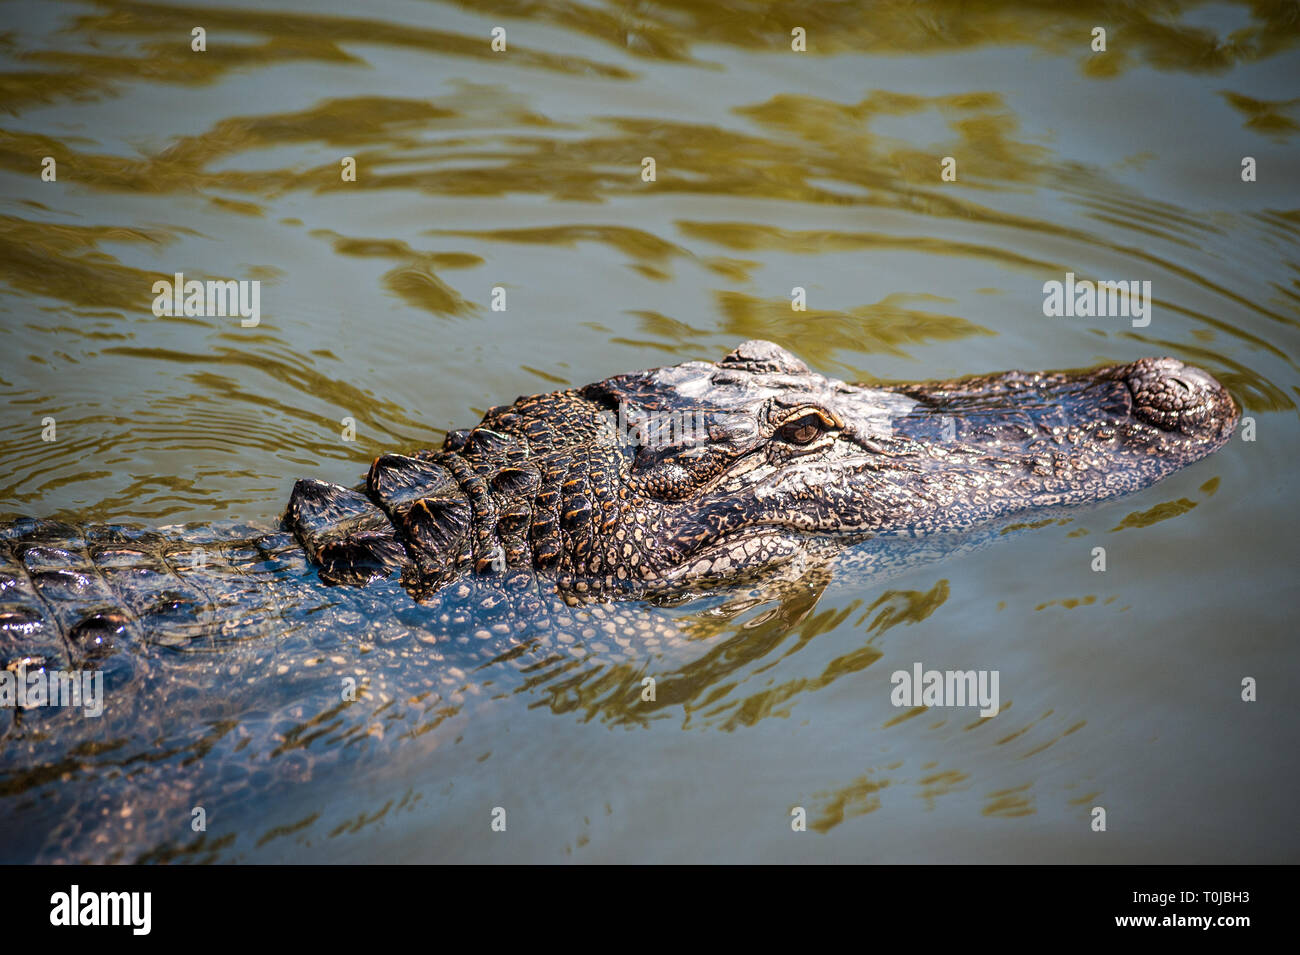 An alligator swims in the muddy water of the swamps of Louisiana, Bayou Black, Louisiana, United States of America, North America Stock Photo